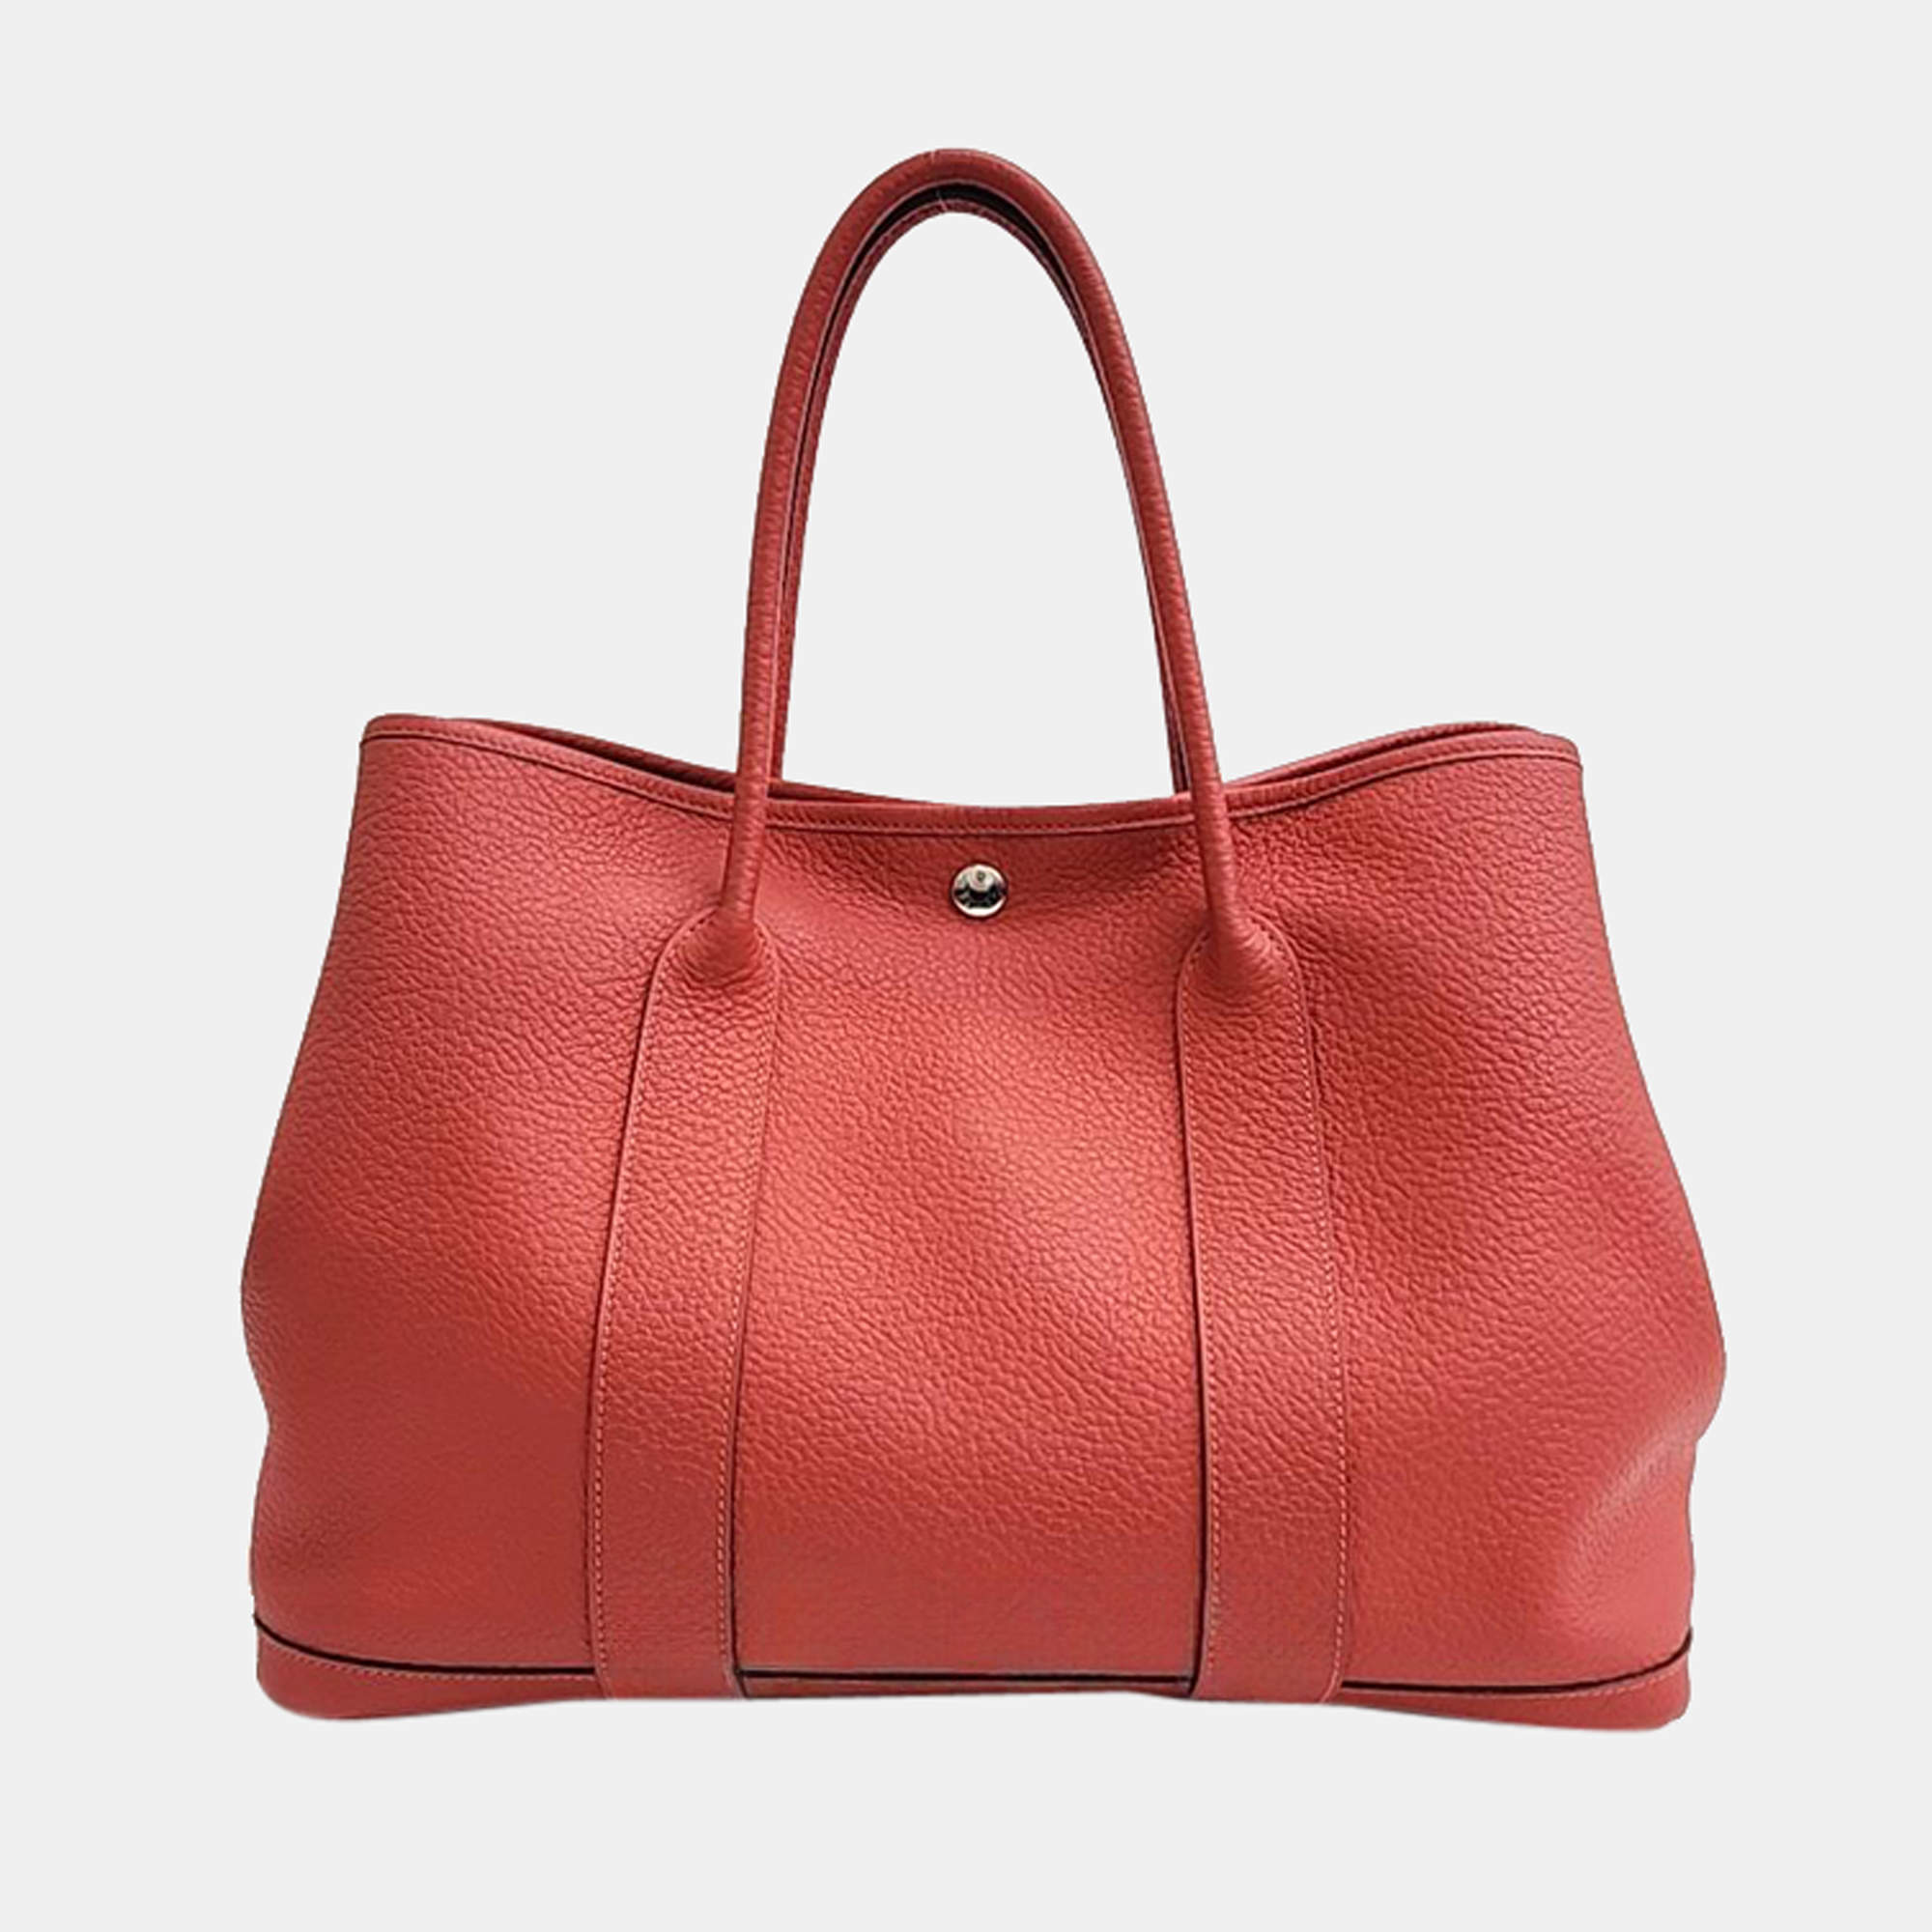 Hermes Red/Orange Leather Garden Party 36 Tote Bag 